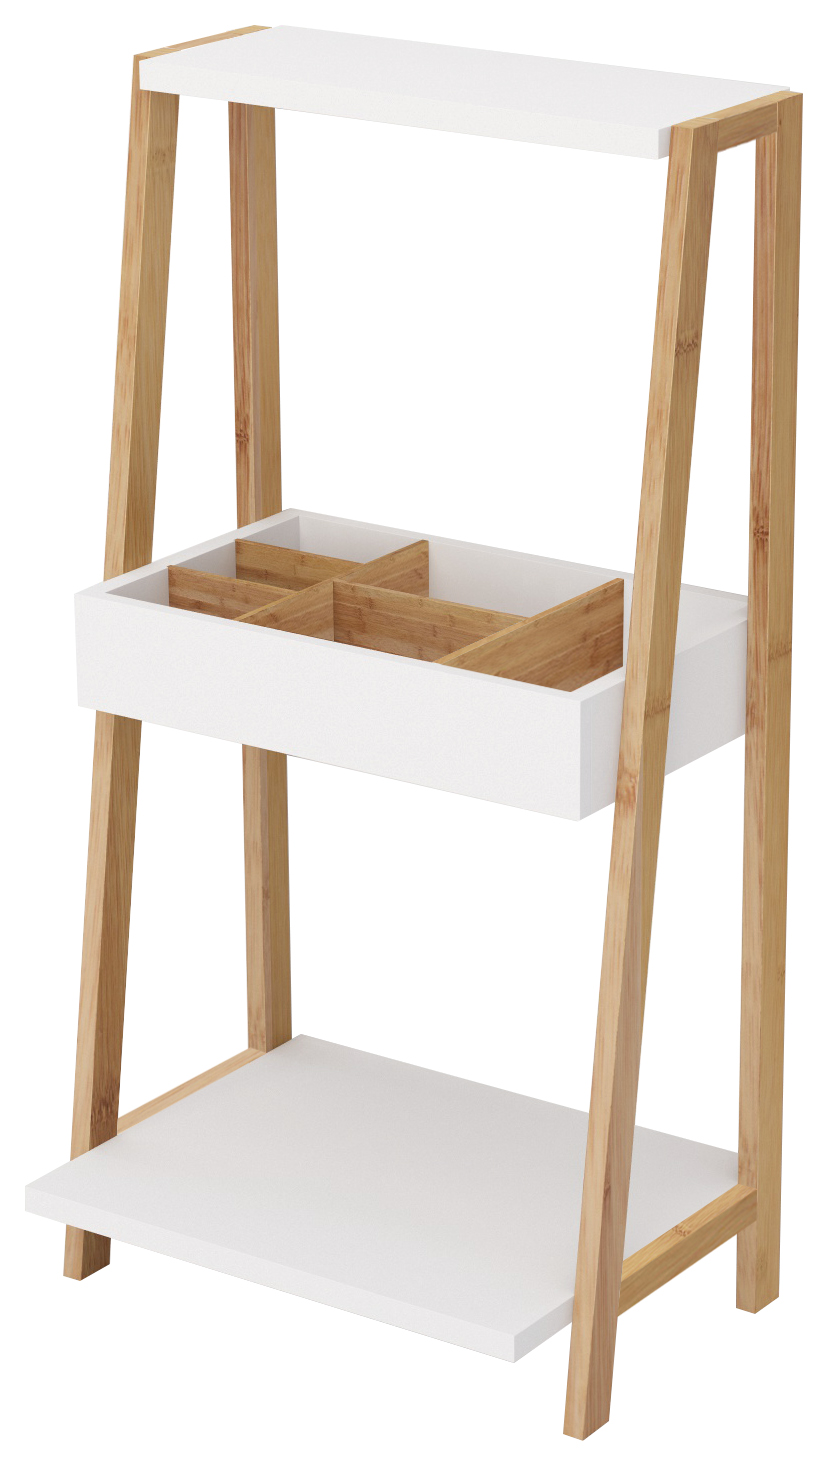 Image of Bamboo 3 Tier Storage Unit - 800 x 410mm